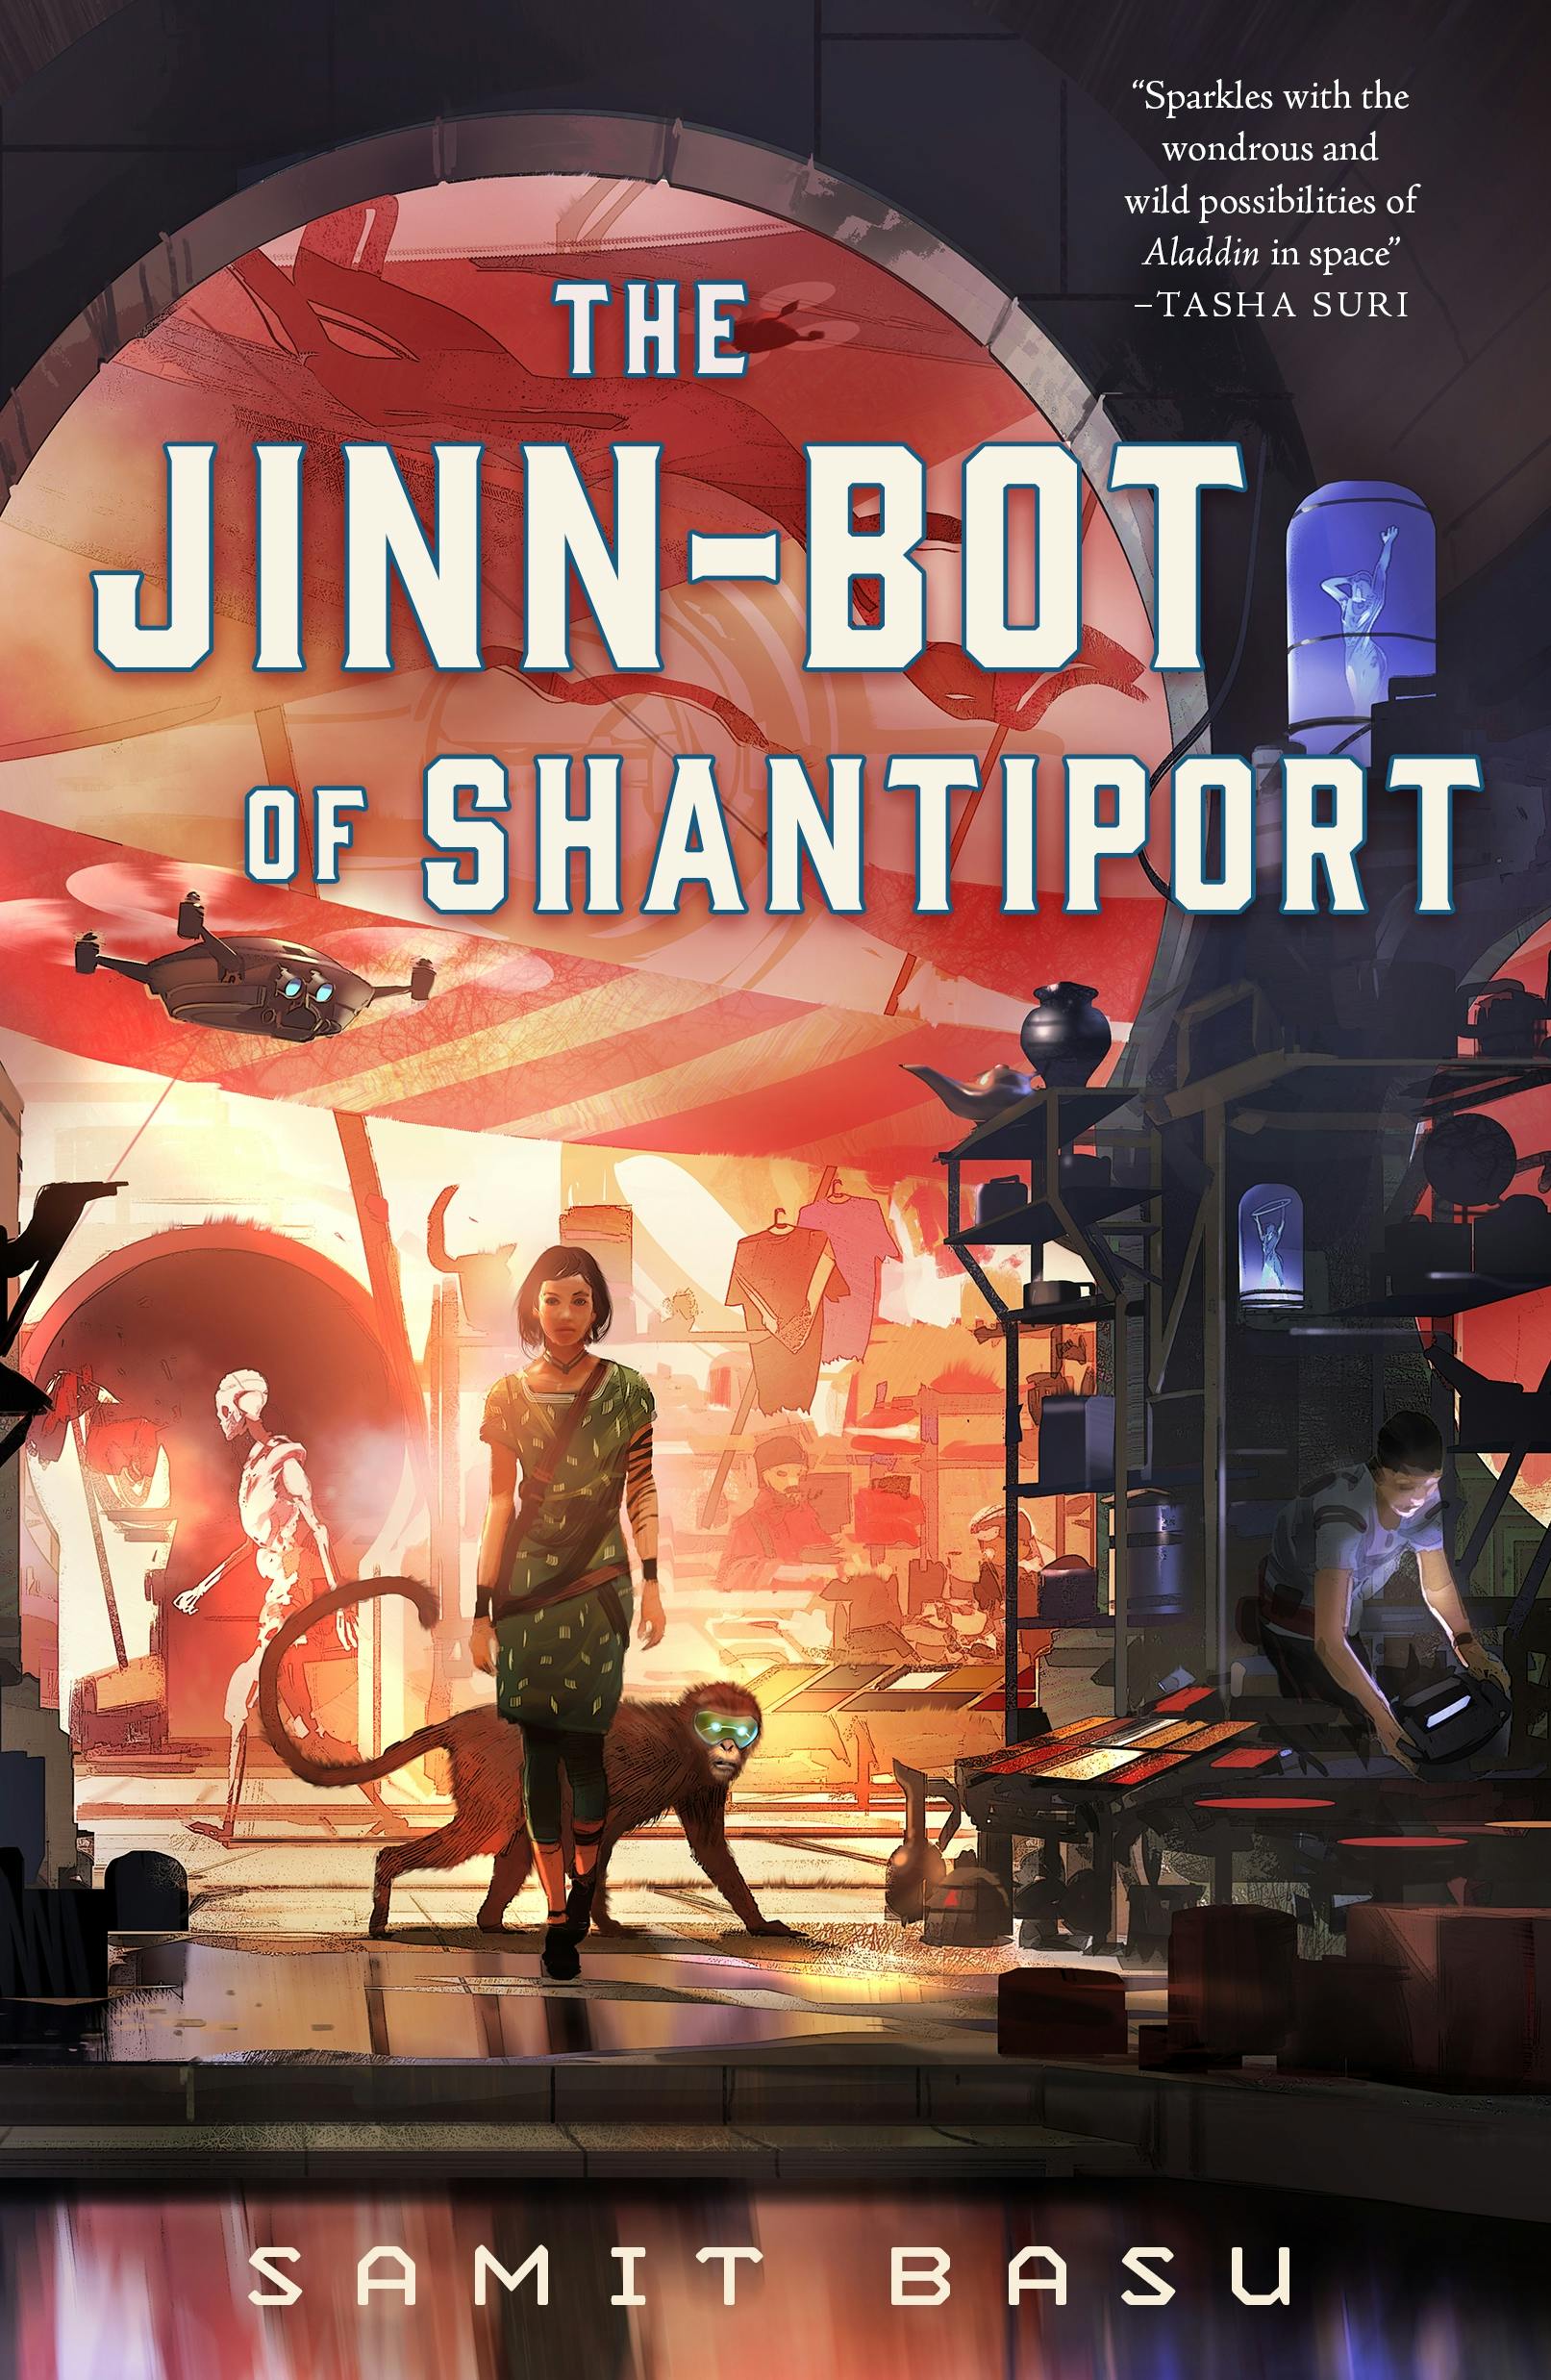 Cover for the book titled as: The Jinn-Bot of Shantiport